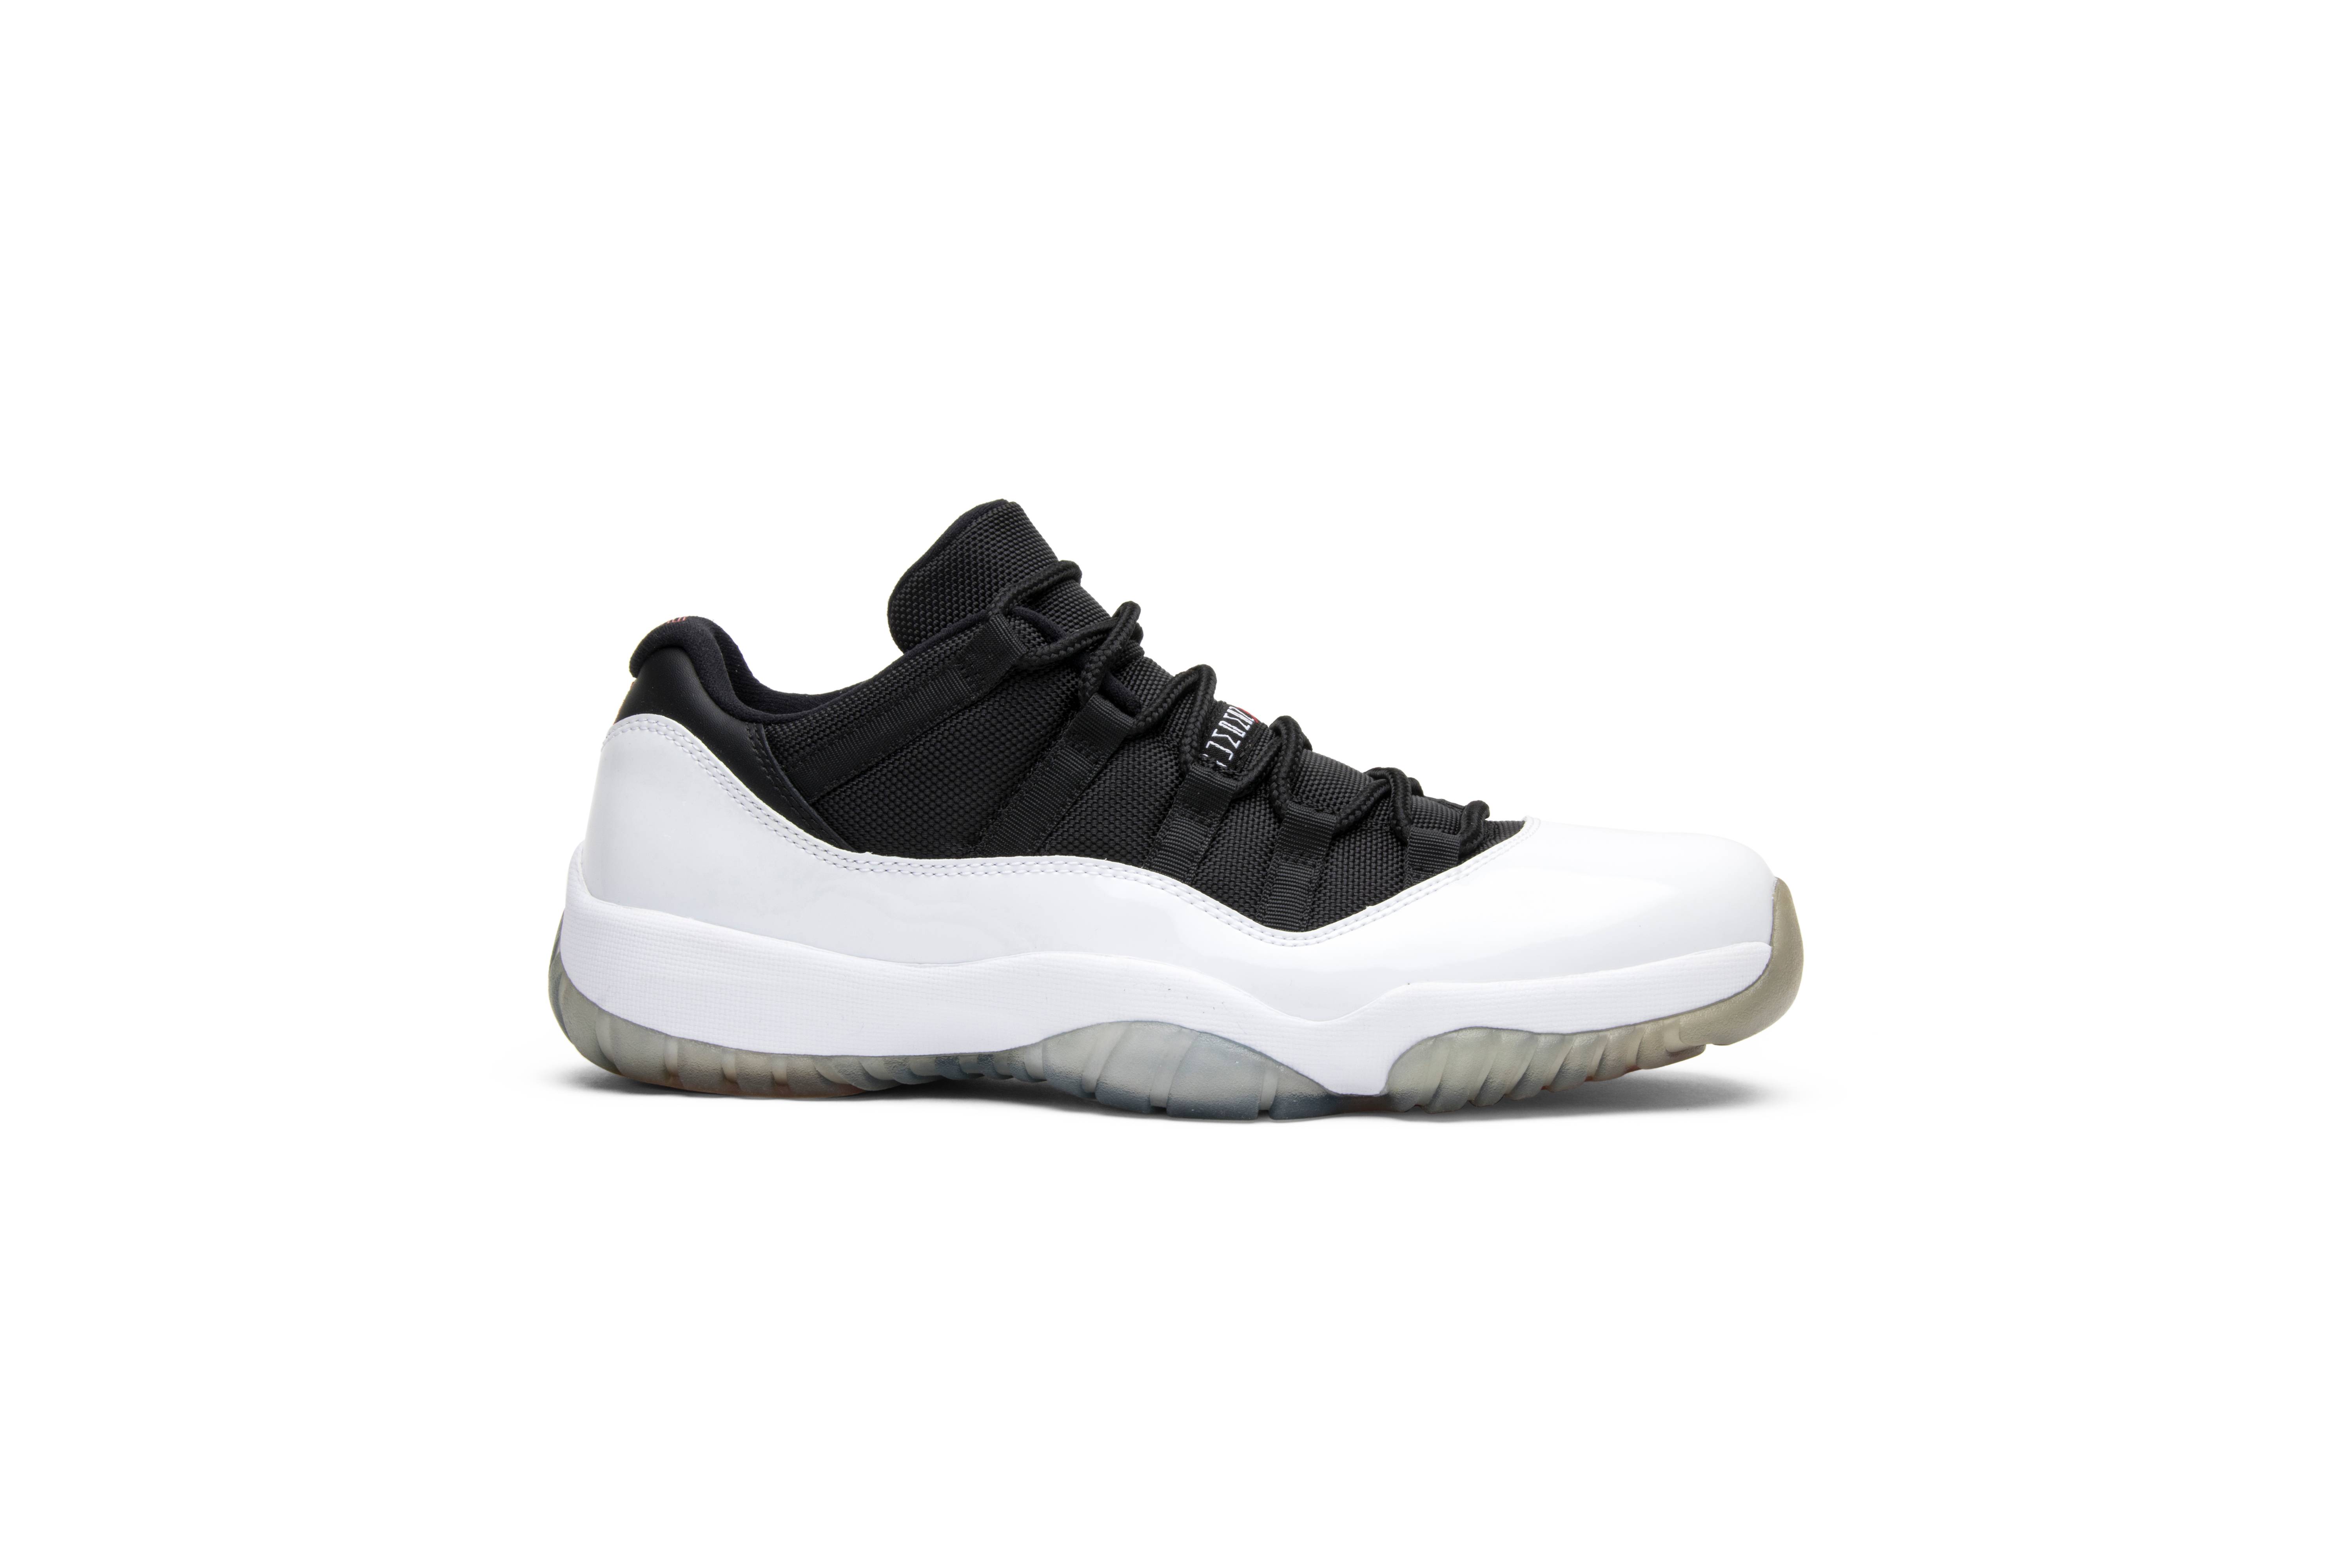 when did the air jordan 11 retro low come out